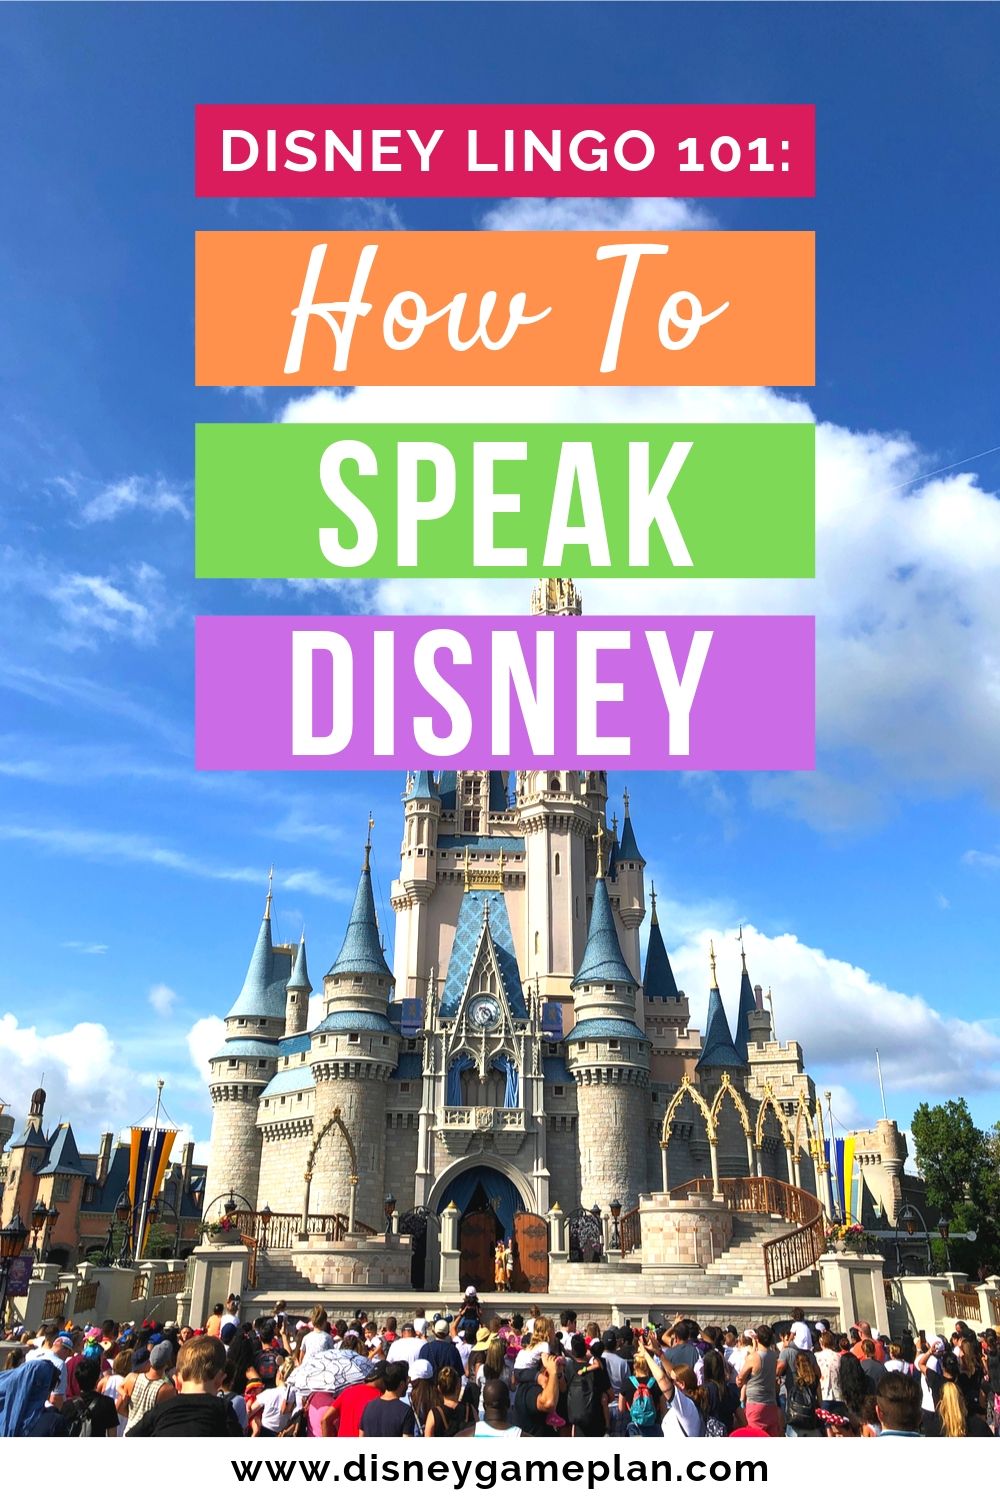 If you are new to Walt Disney World, this Ultimate Guide to Disney abbreviations and acronyms will help you understand the Disney World lingo in no time. #disneylingo #disneytips #disneyhacks